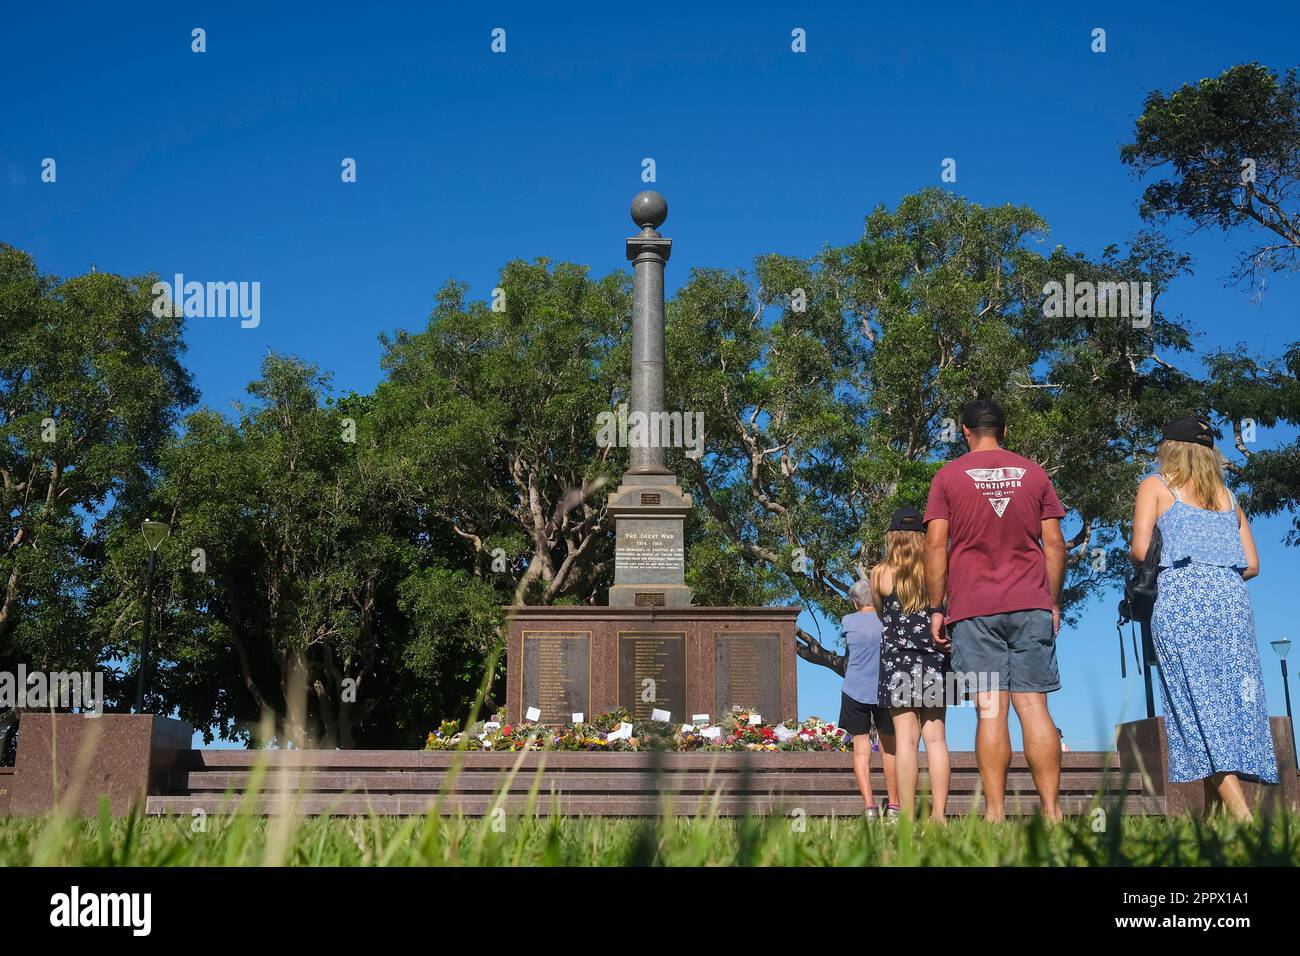 The Cenotaph on Bicentennial Park in Darwin, Northern Territory, Australia commemorates Australian servicemen and women who have served in conflicts i Stock Photo